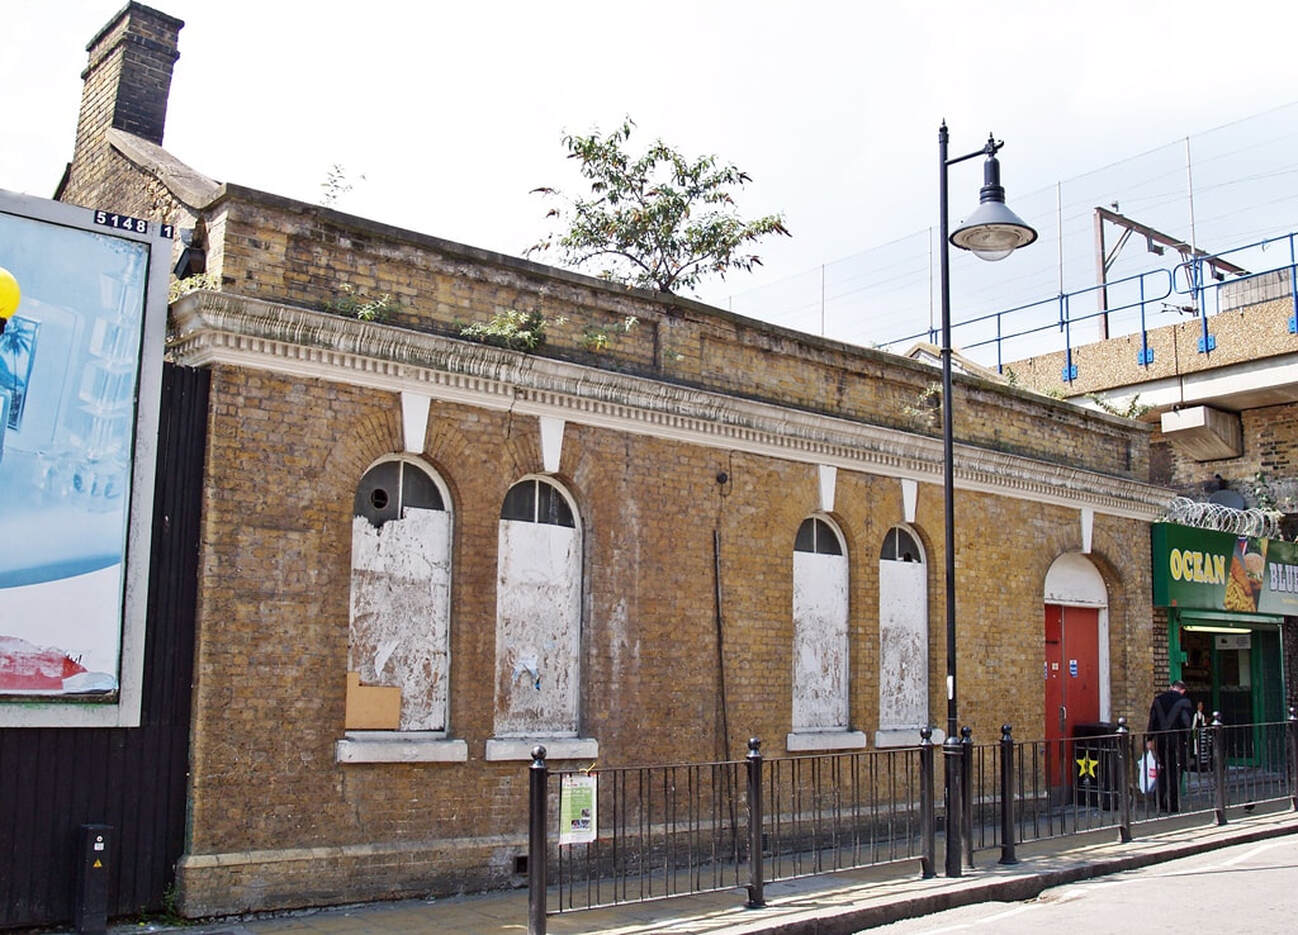  Abandoned Shadwell Underground Station in Watney Street once on the East London Tube Line